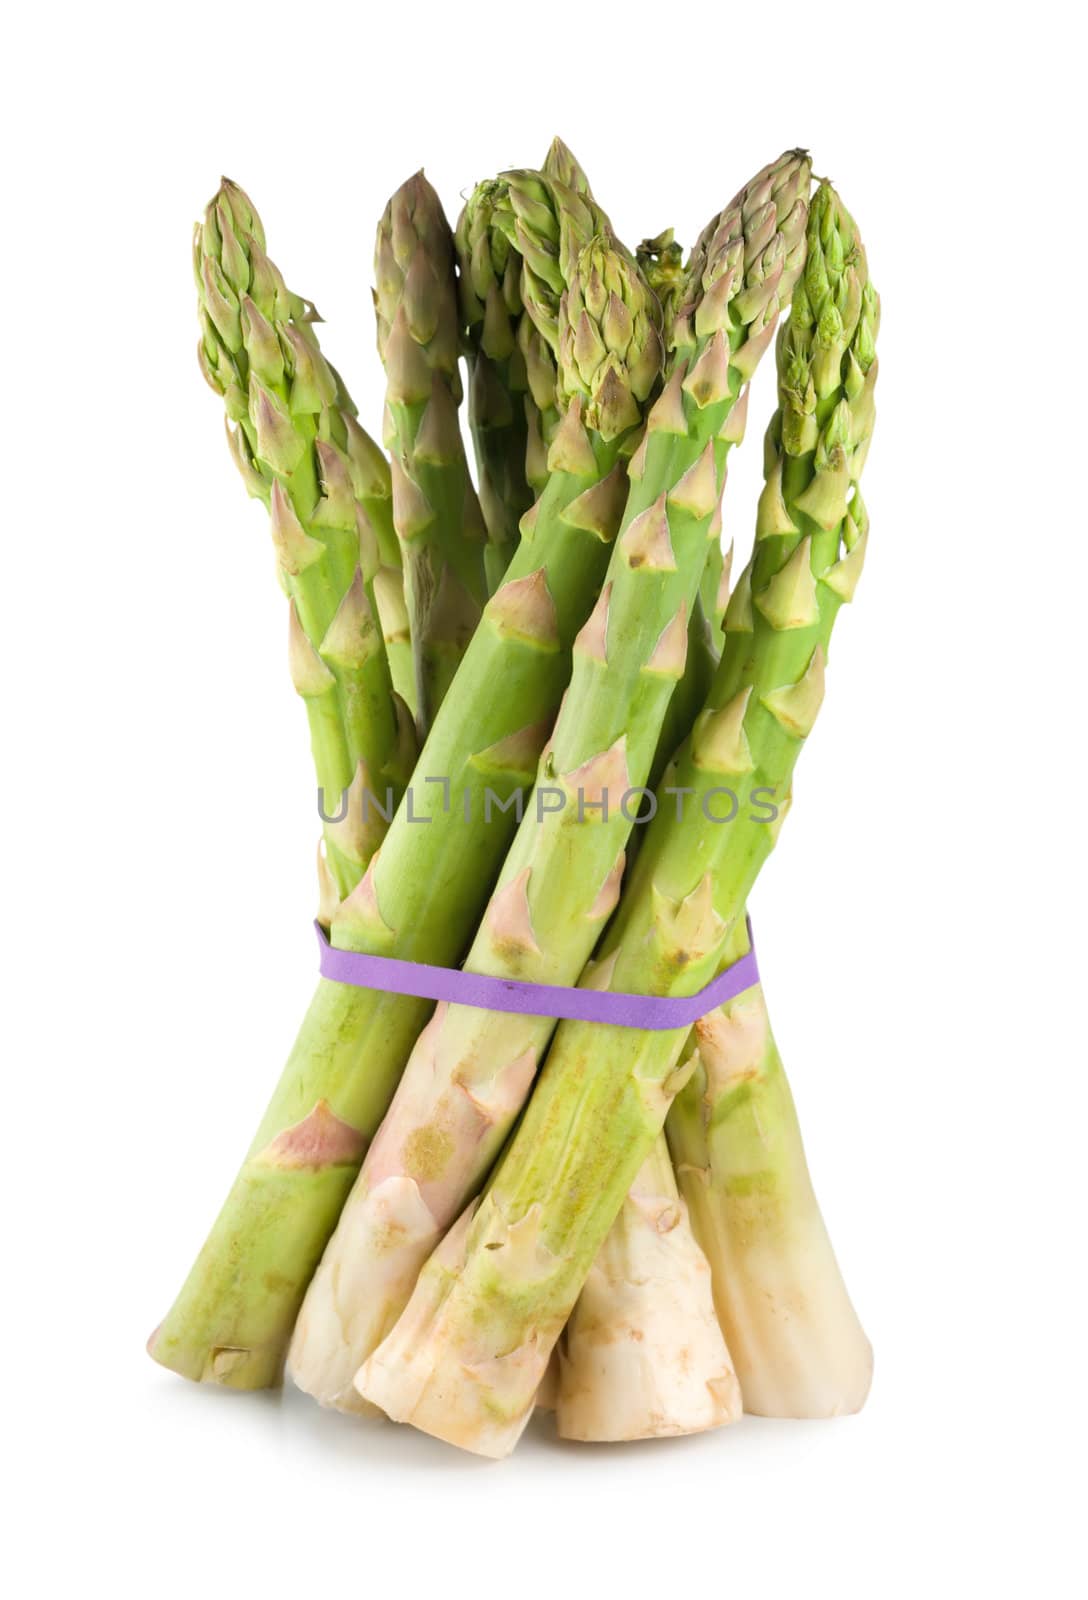 Raw asparagus isolated on a white background